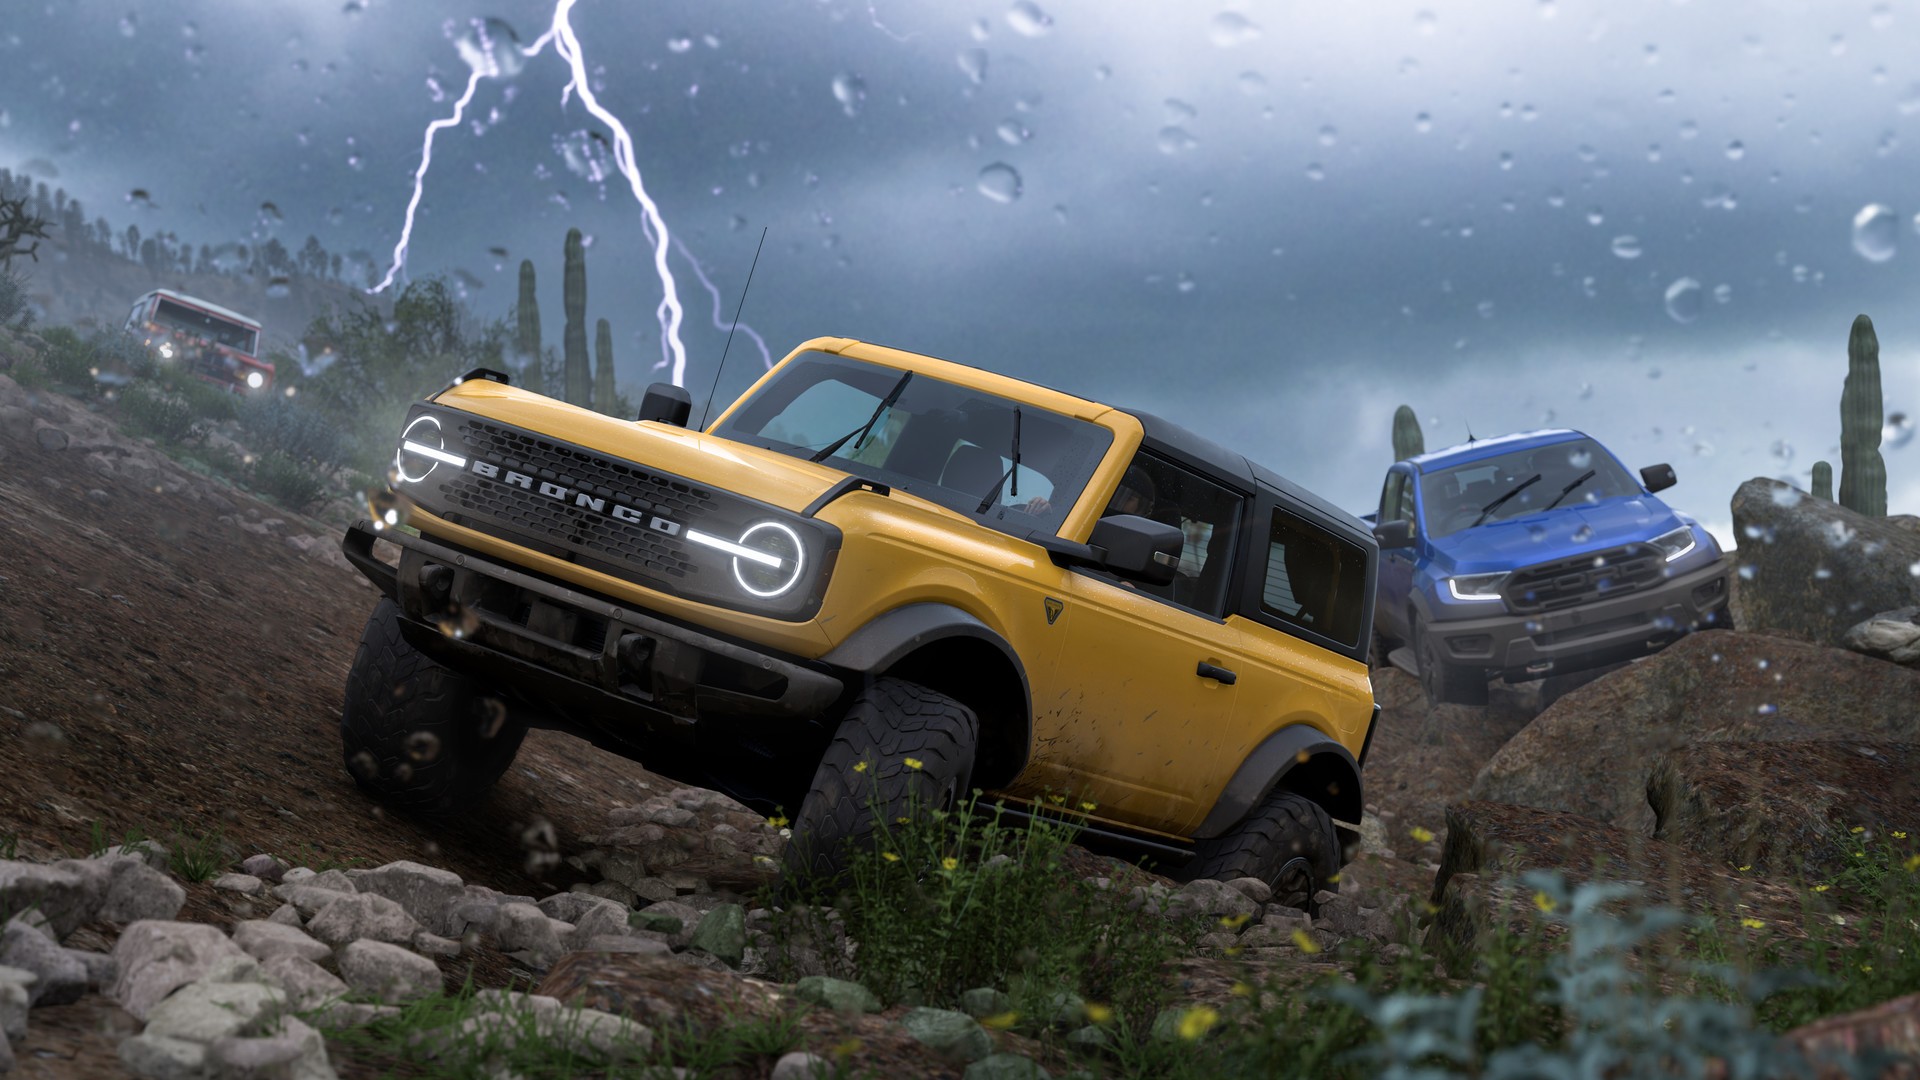 Forza Horizon 5's Hot Wheels Expansion Pack Leaks Out Ahead of Official  Reveal – GTPlanet